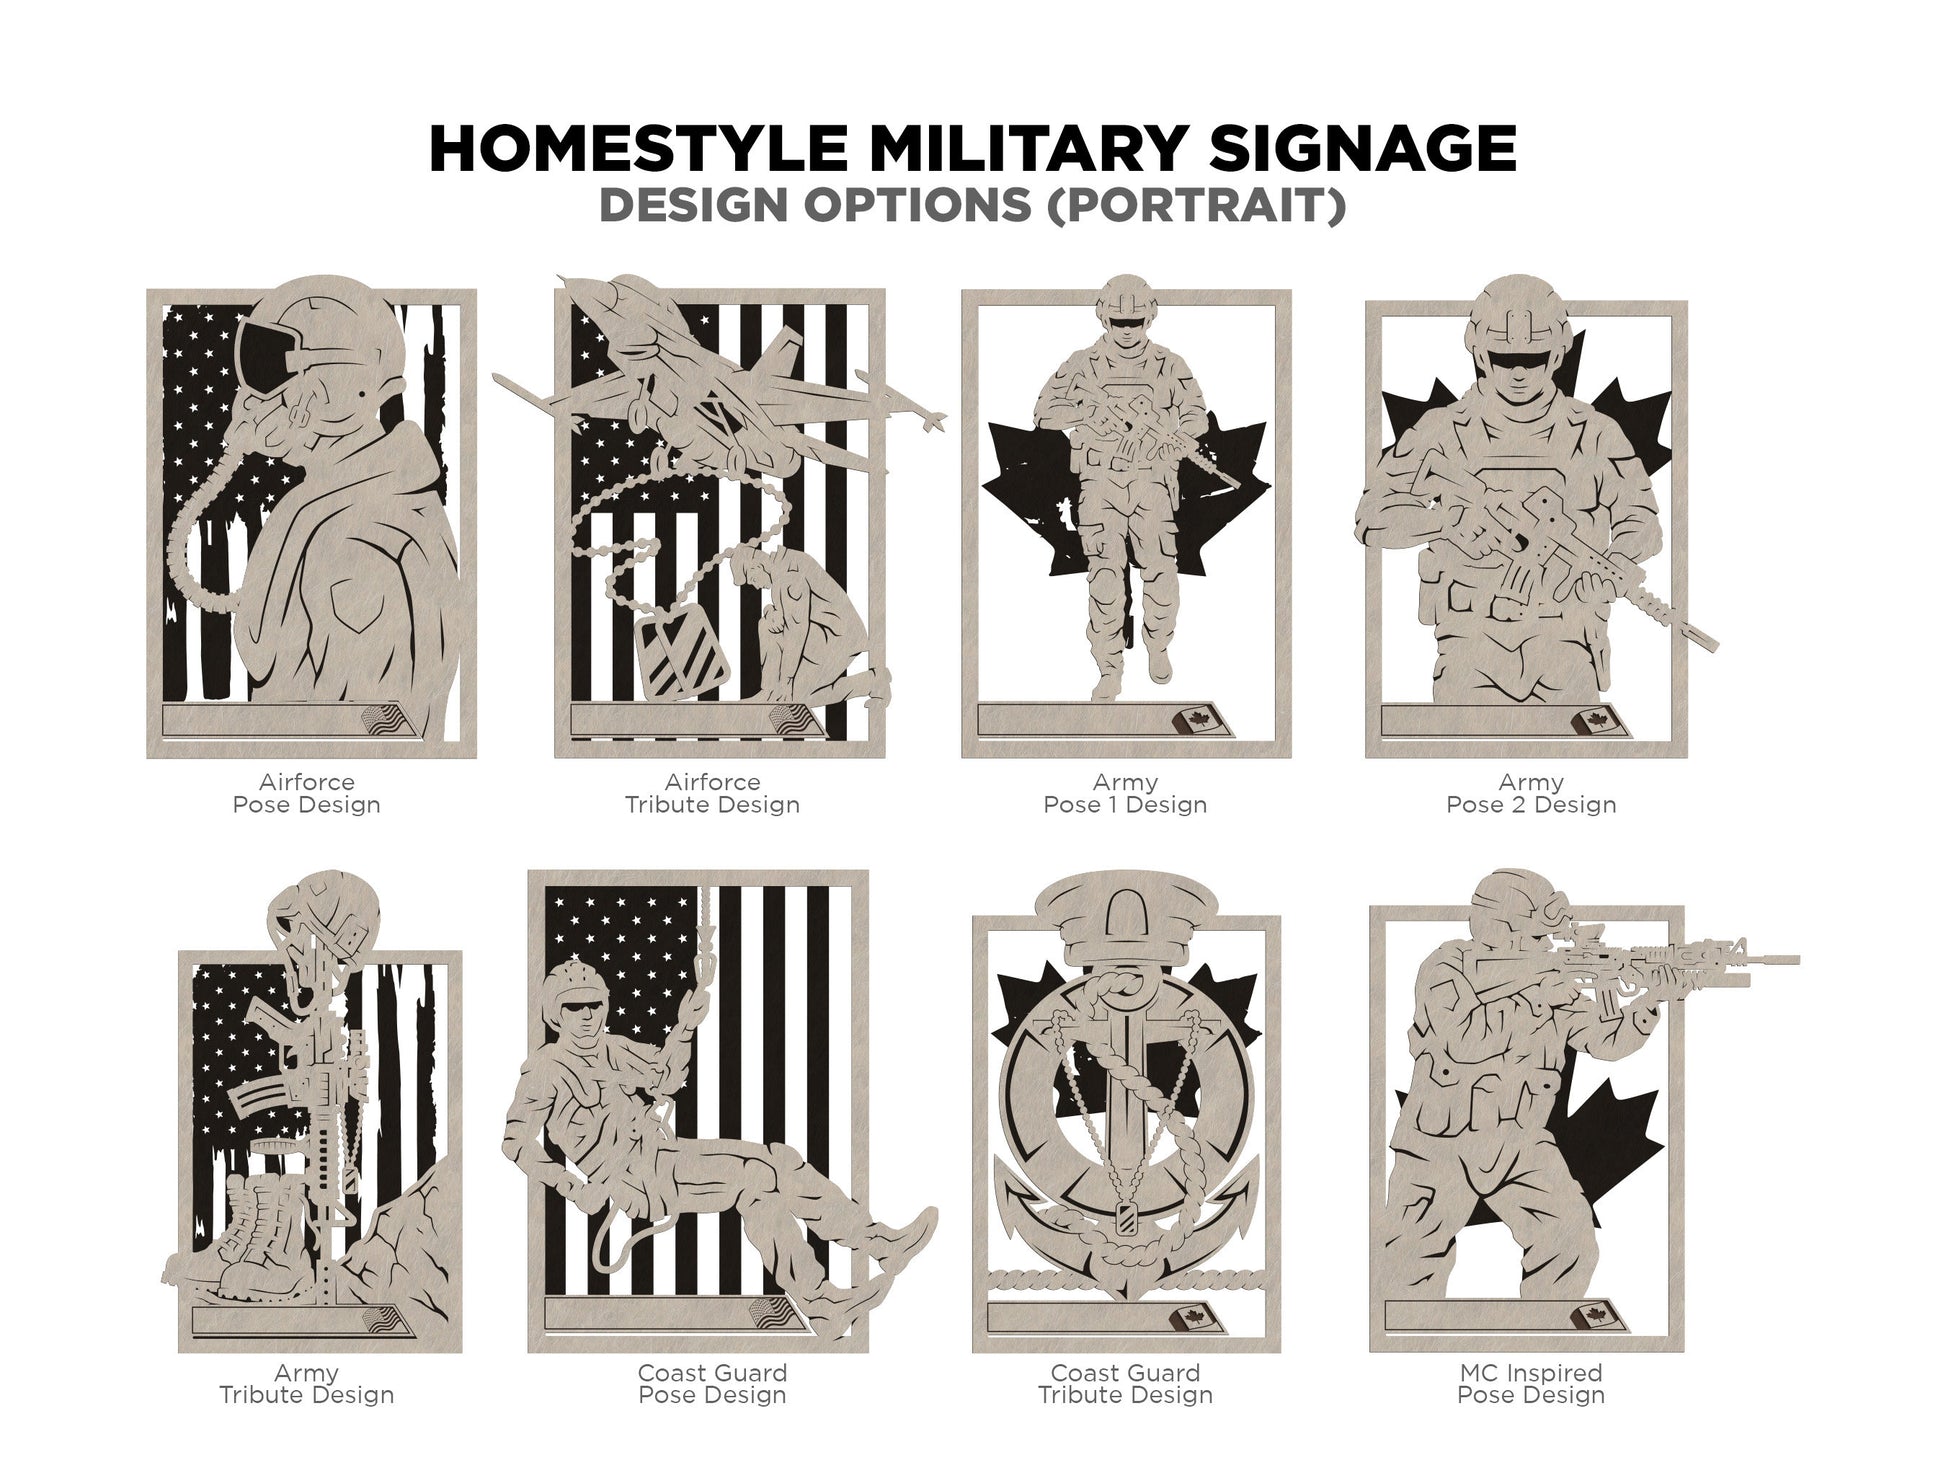 Homestyle Military Signage - Includes 17 sign Options and US and Canadian Flag backers- Tested on Glowforge & Lightburn